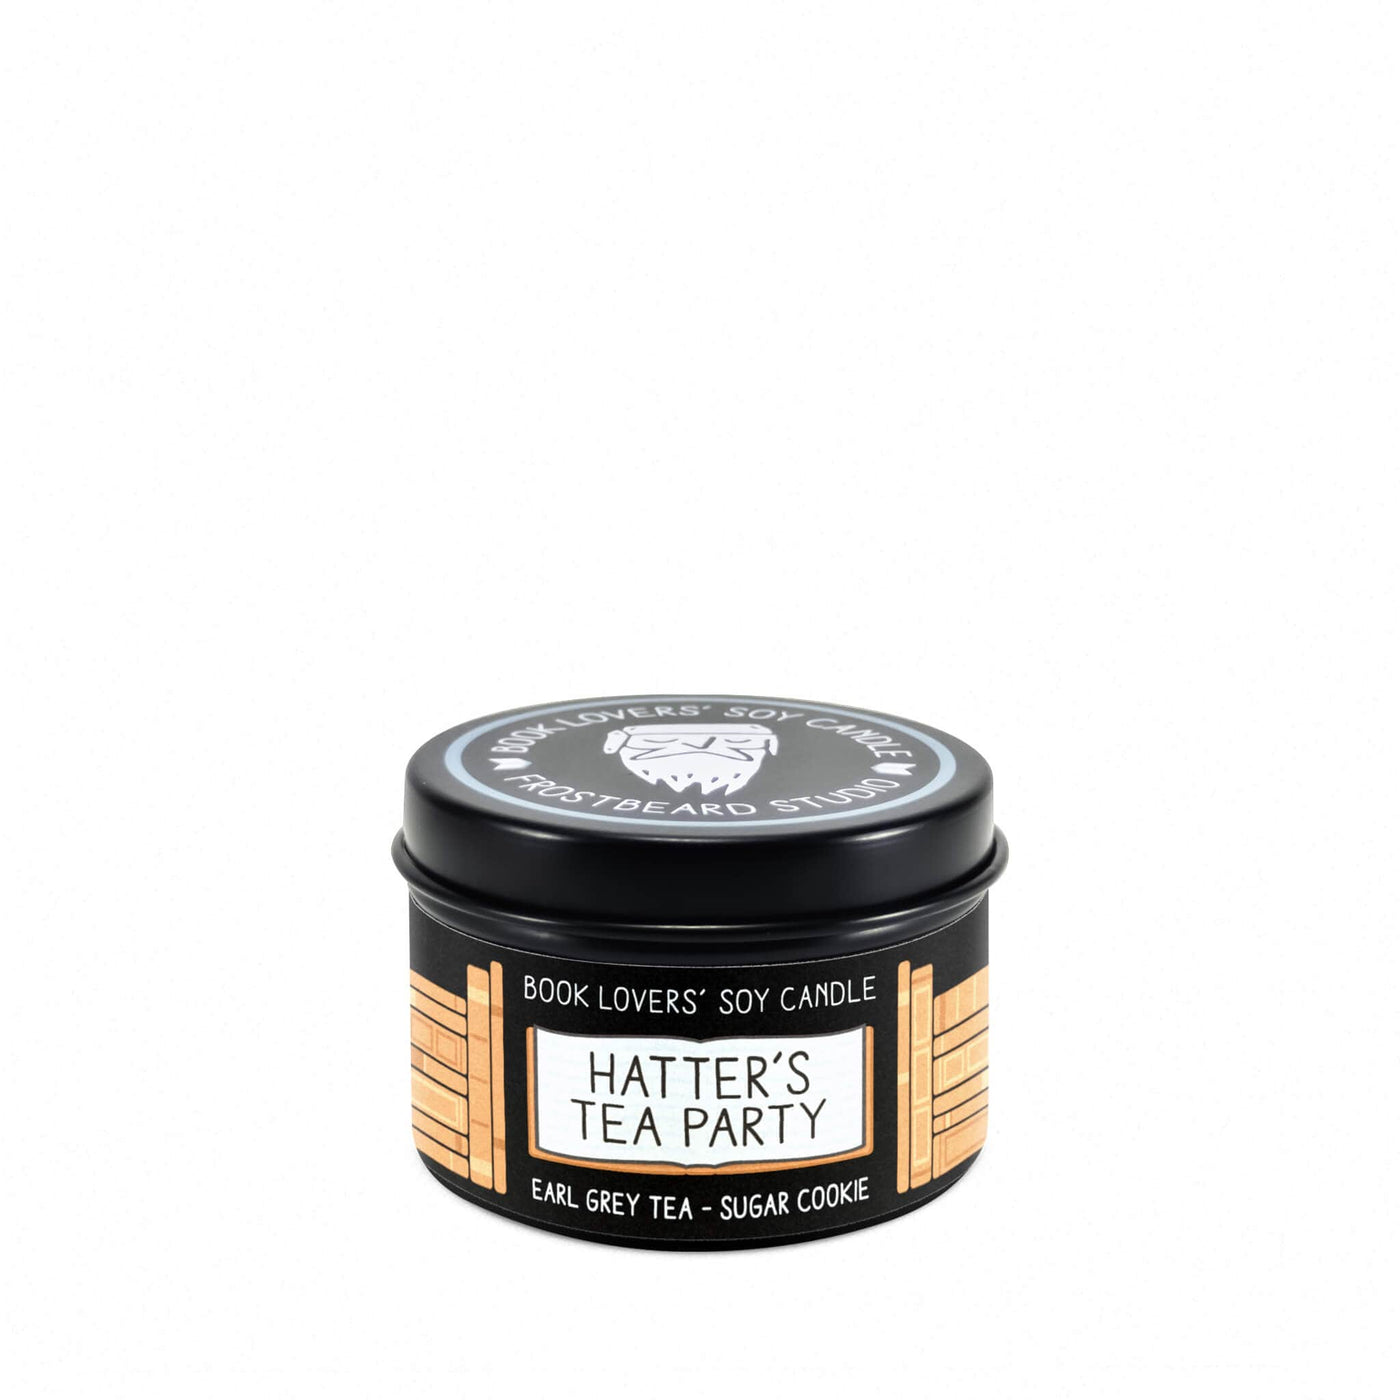 Hatter's Tea Party  -  2 oz Tin  -  Book Lovers' Soy Candle  -  Frostbeard Studio